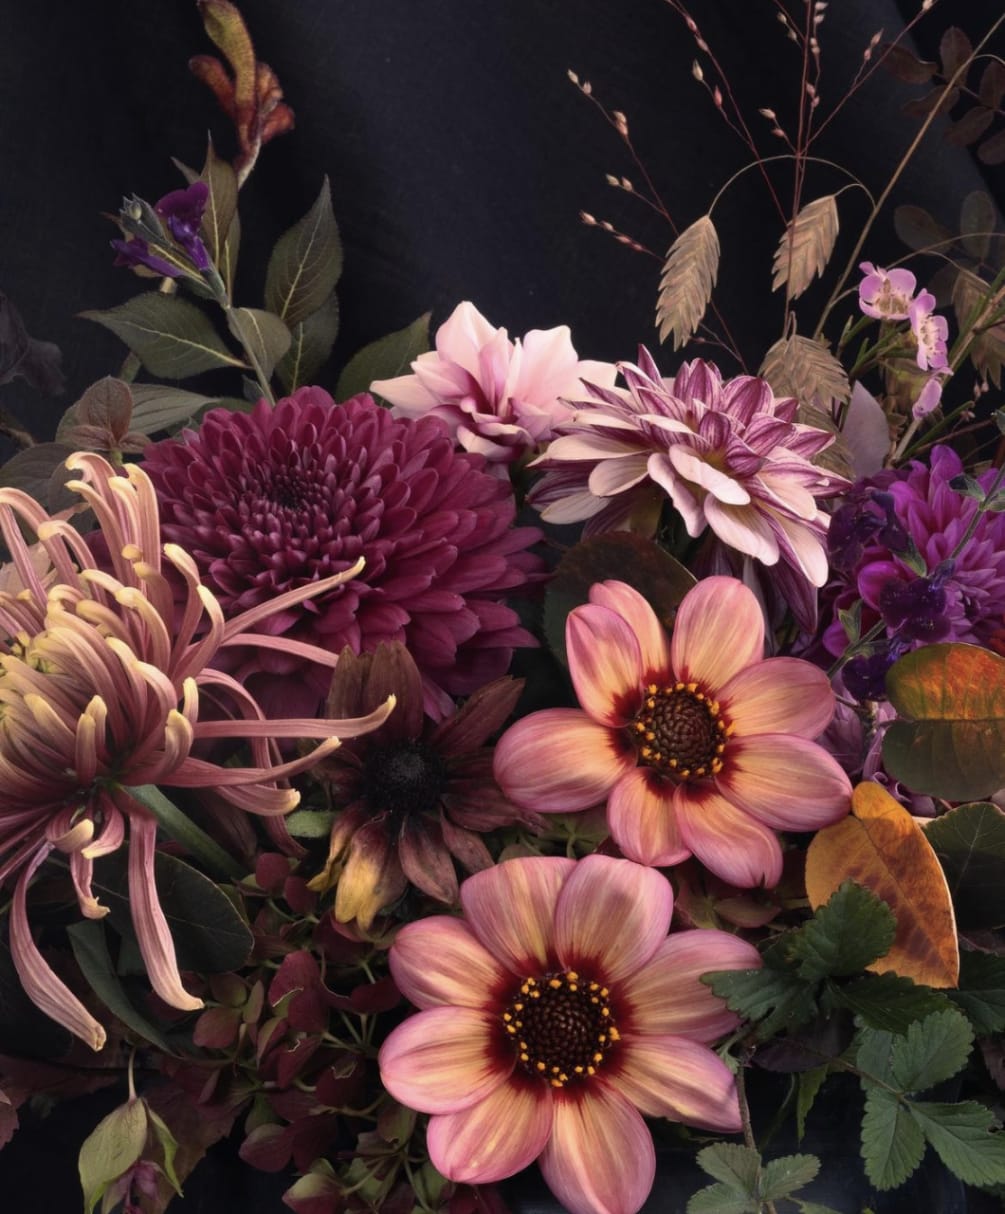 Our designer will design a gorgeous seasonal bouquet with the freshest possible